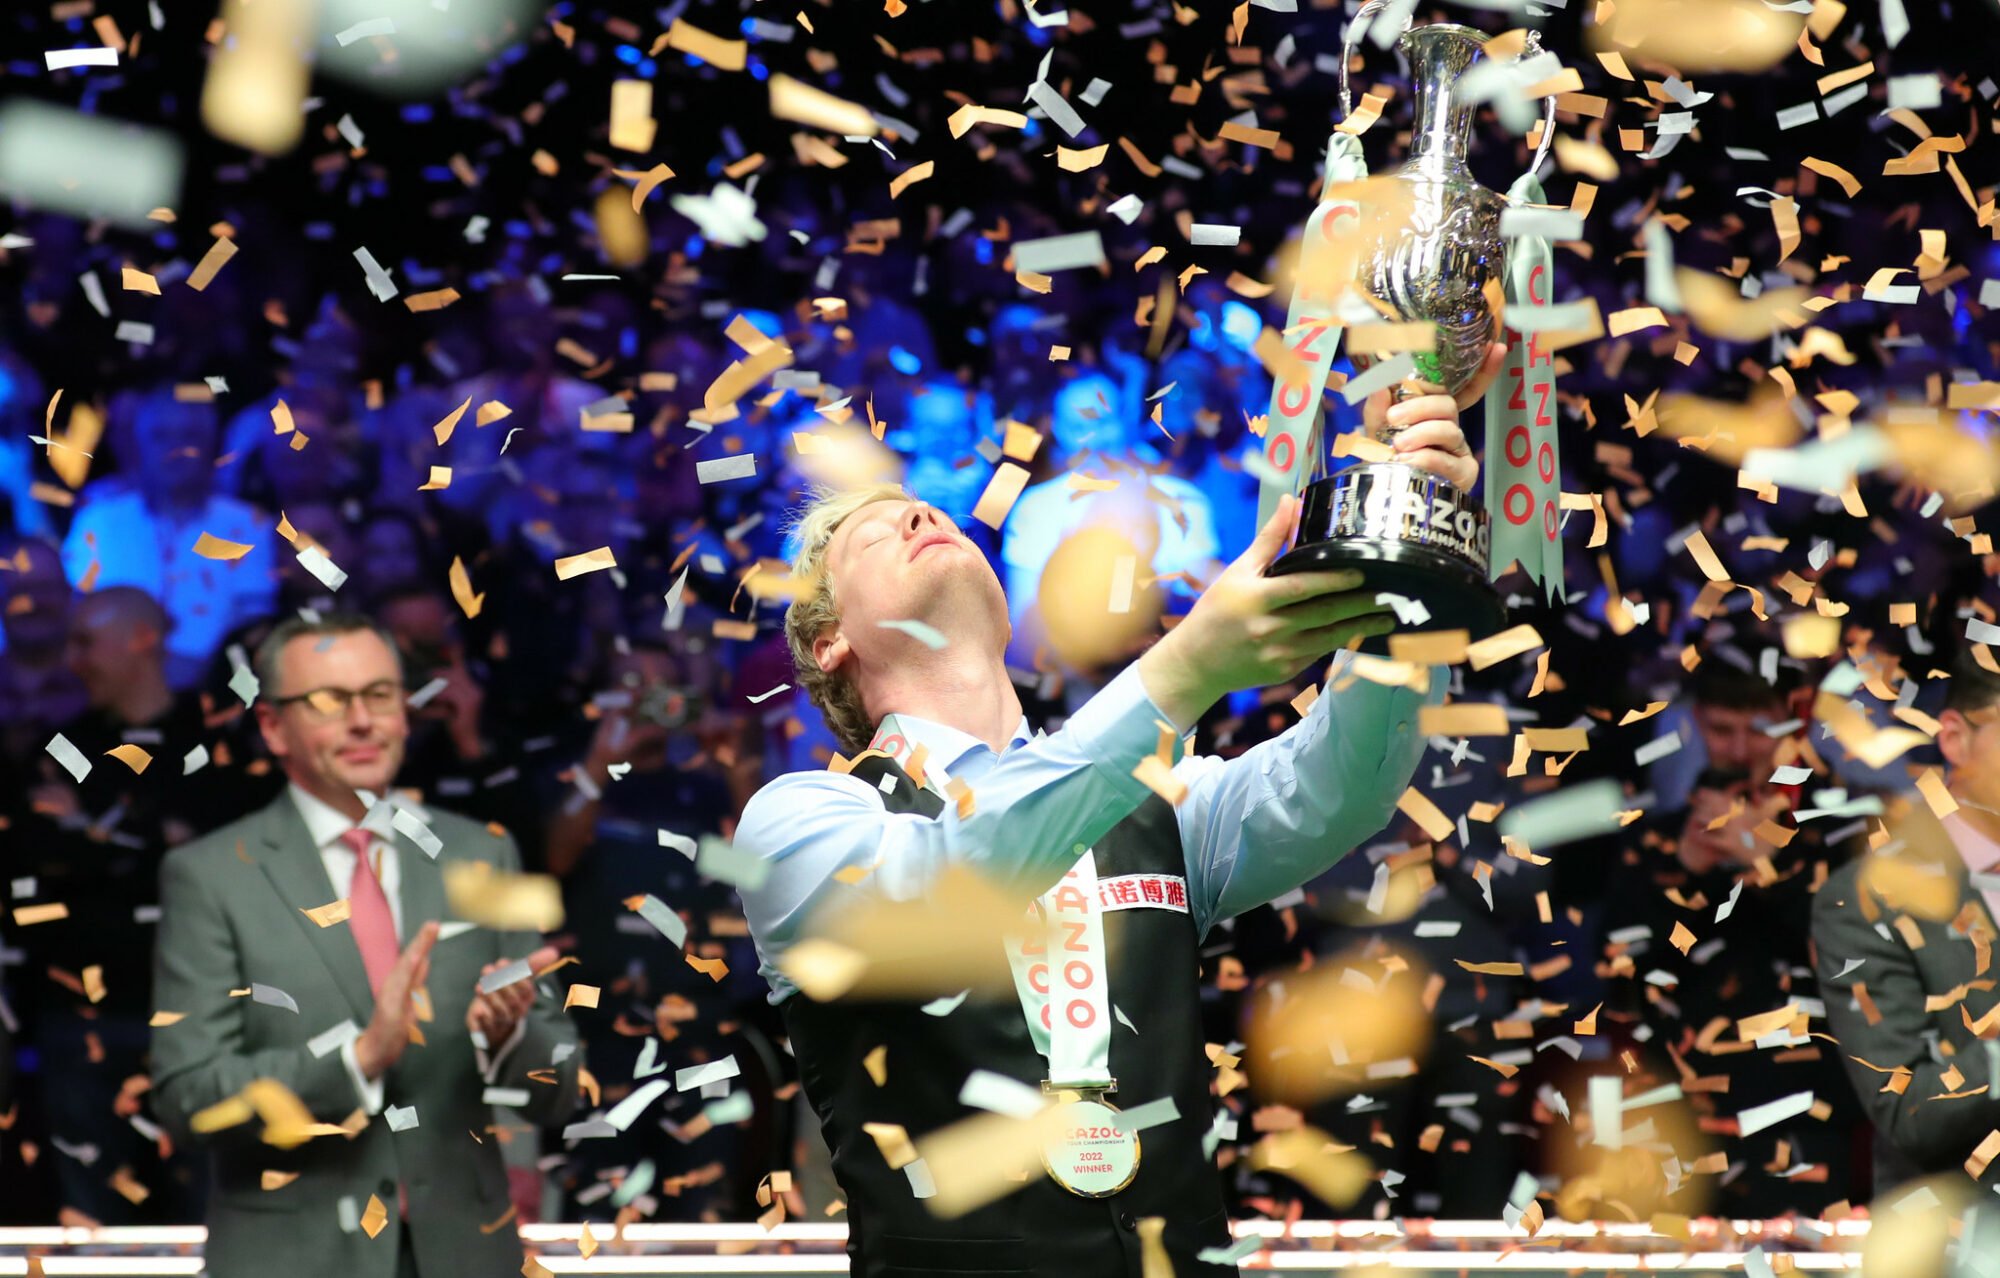 Image name neil robertson winning the snooker tour championship the 6 image from the post Snooker Tour Championship coming to Hull in 2023 in Yorkshire.com.